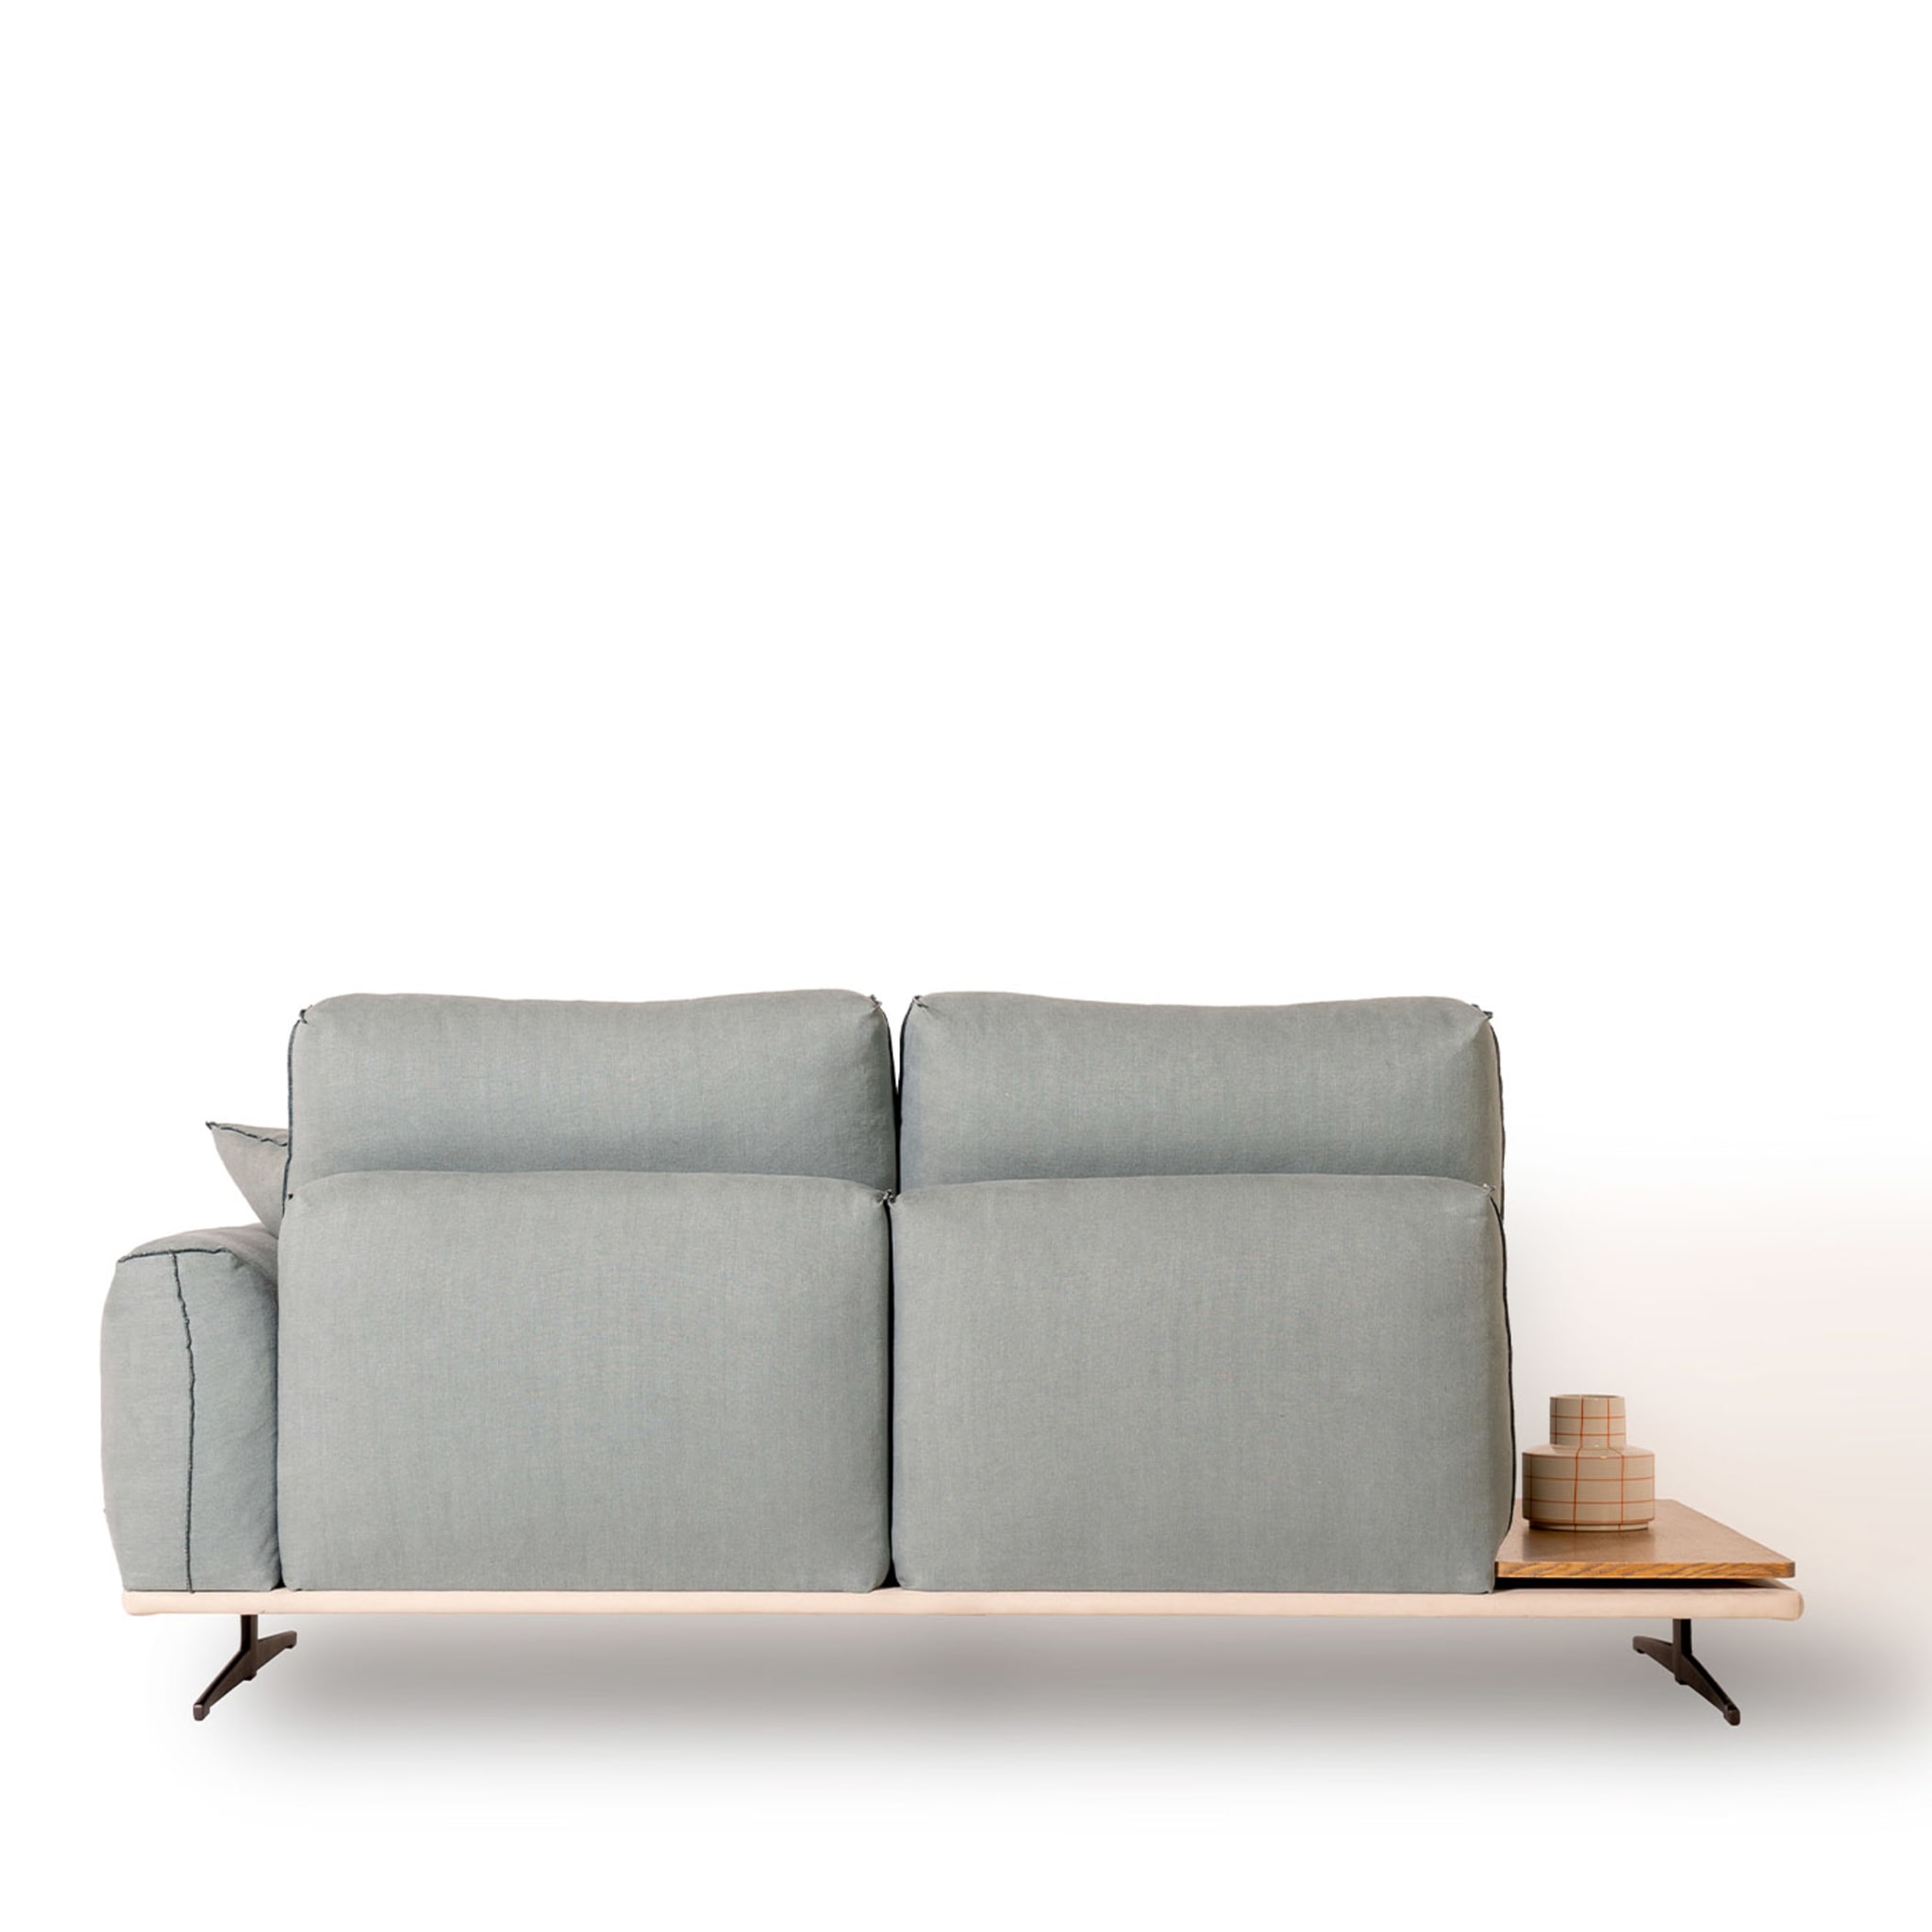 Boboli Sofa with Side Table by Marco and Giulio Mantellassi - Alternative view 4